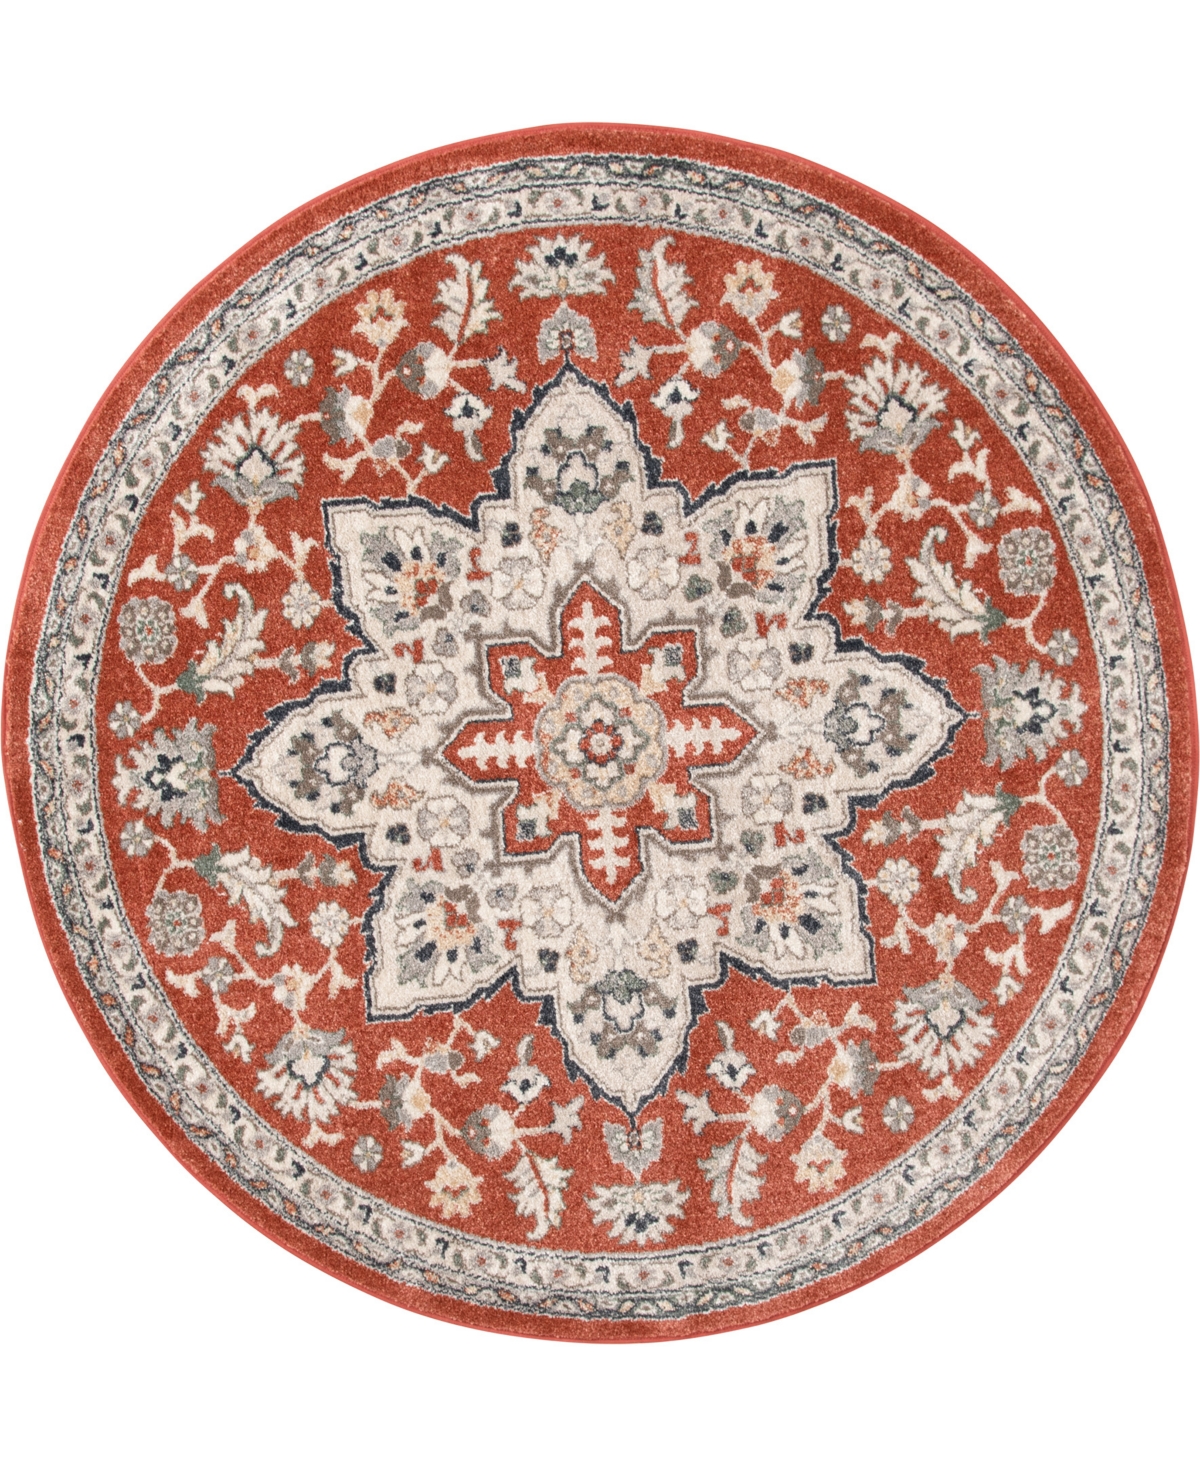 Km Home Poise Pse-7230 5'3" X 5'3" Round Area Rug In Paprika